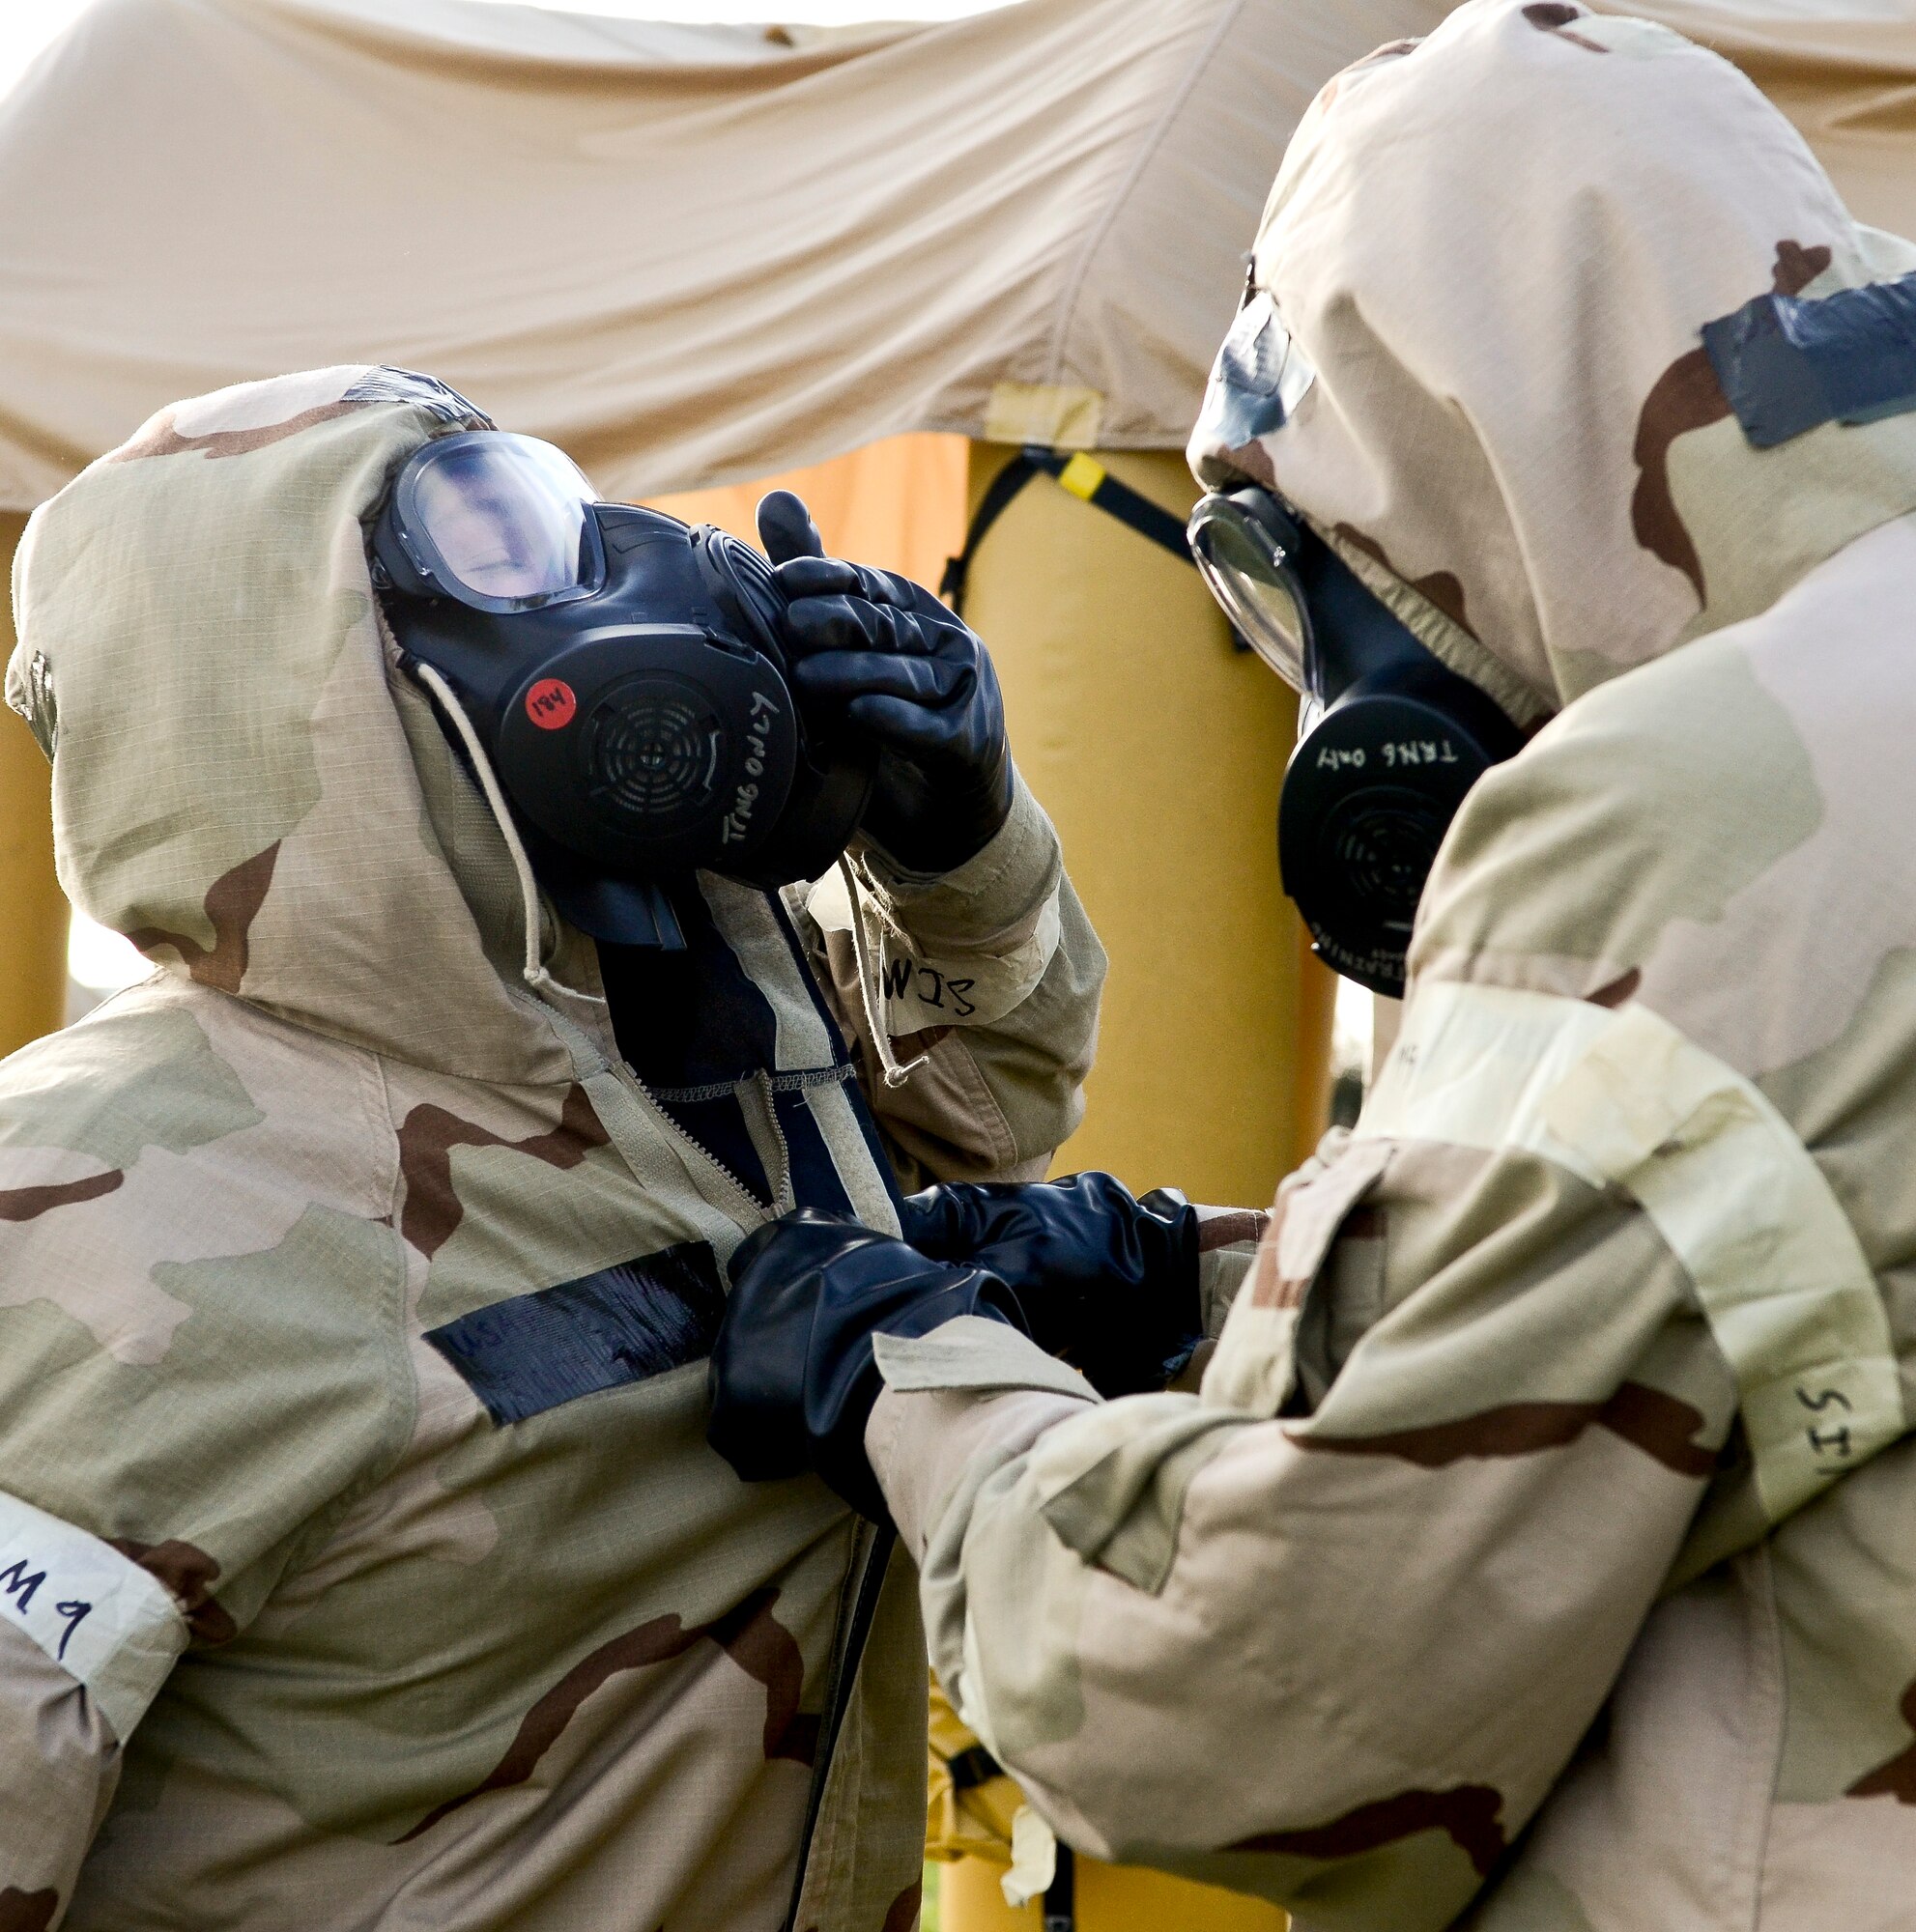 U.S. Air Force Airmen assist one another while processing through a contamination control area during an operational readiness inspection at Robins Air Force Base, Ga., Sept. 6, 2012. More than 500 Airmen simulated a deployment that tested basic knowledge such as self-aid and buddy care, and chemical, biological, radioactive nuclear and explosive responses. (National Guard photo by Master Sgt. Roger Parsons/Released)